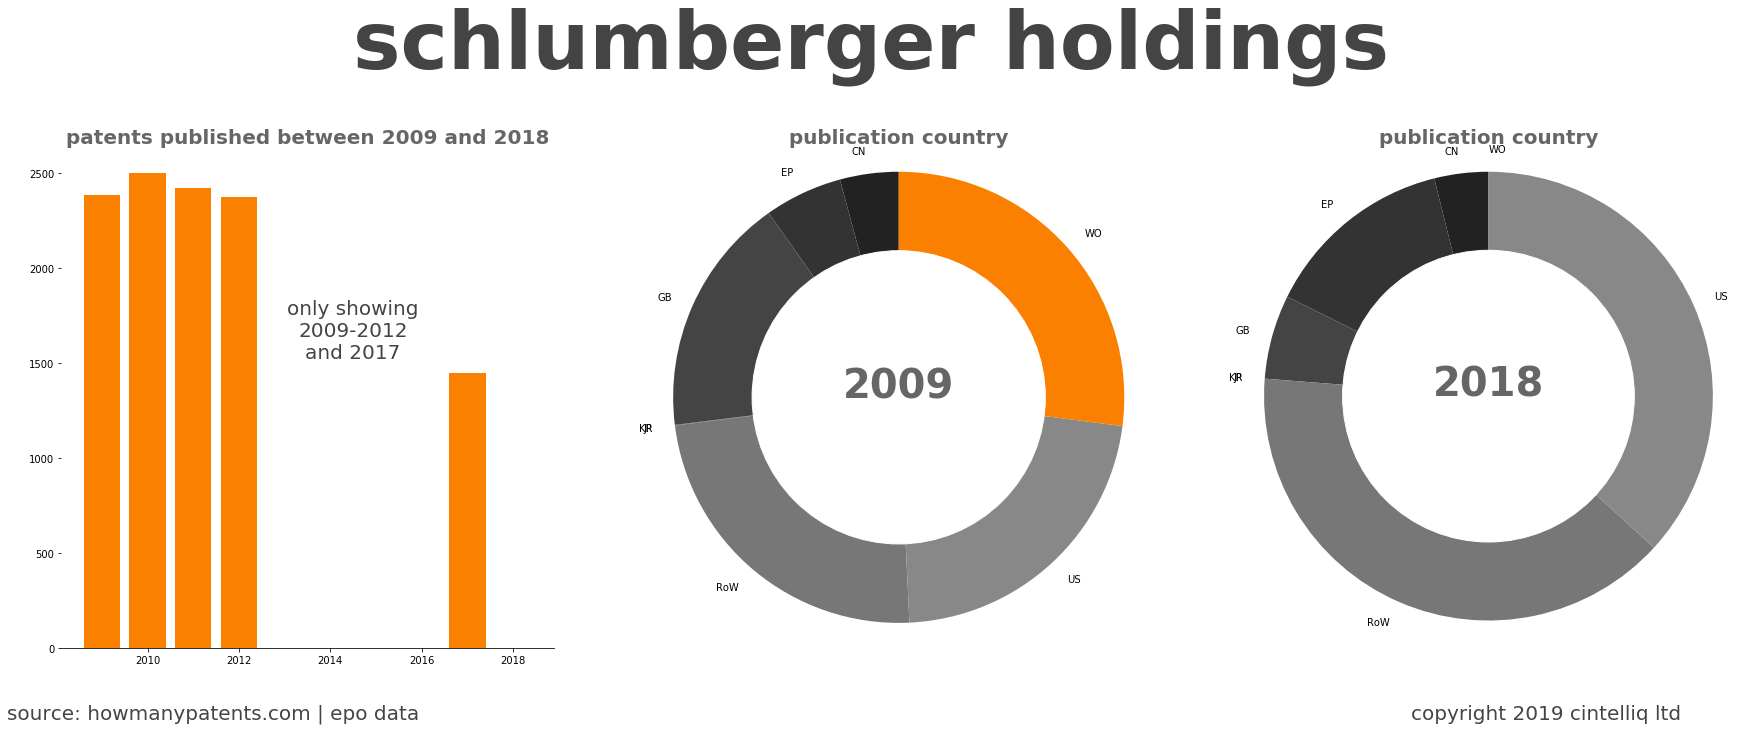 summary of patents for Schlumberger Holdings